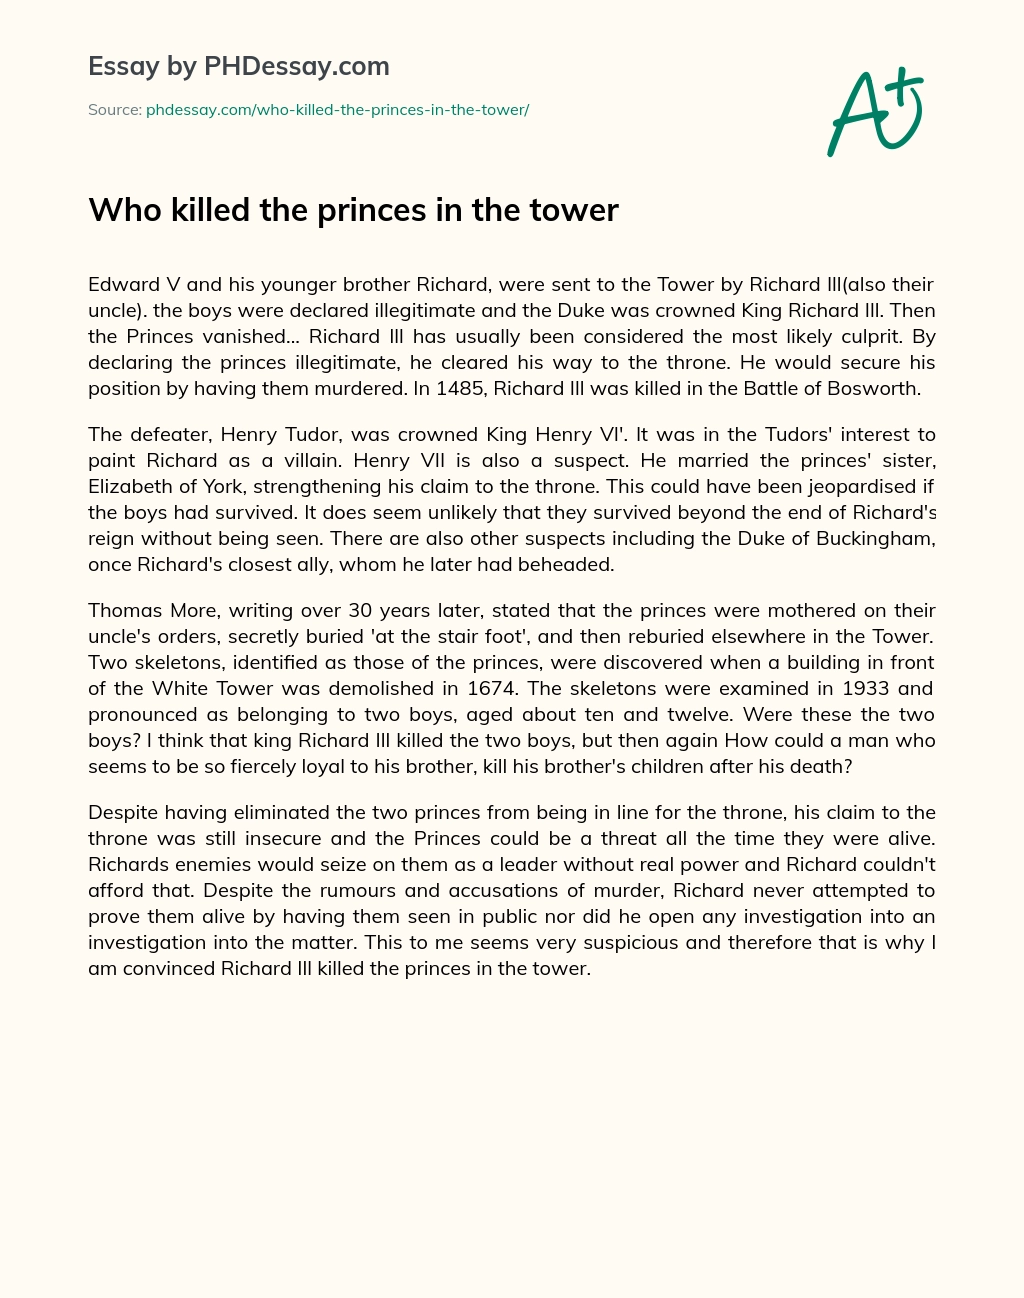 Who killed the princes in the tower essay